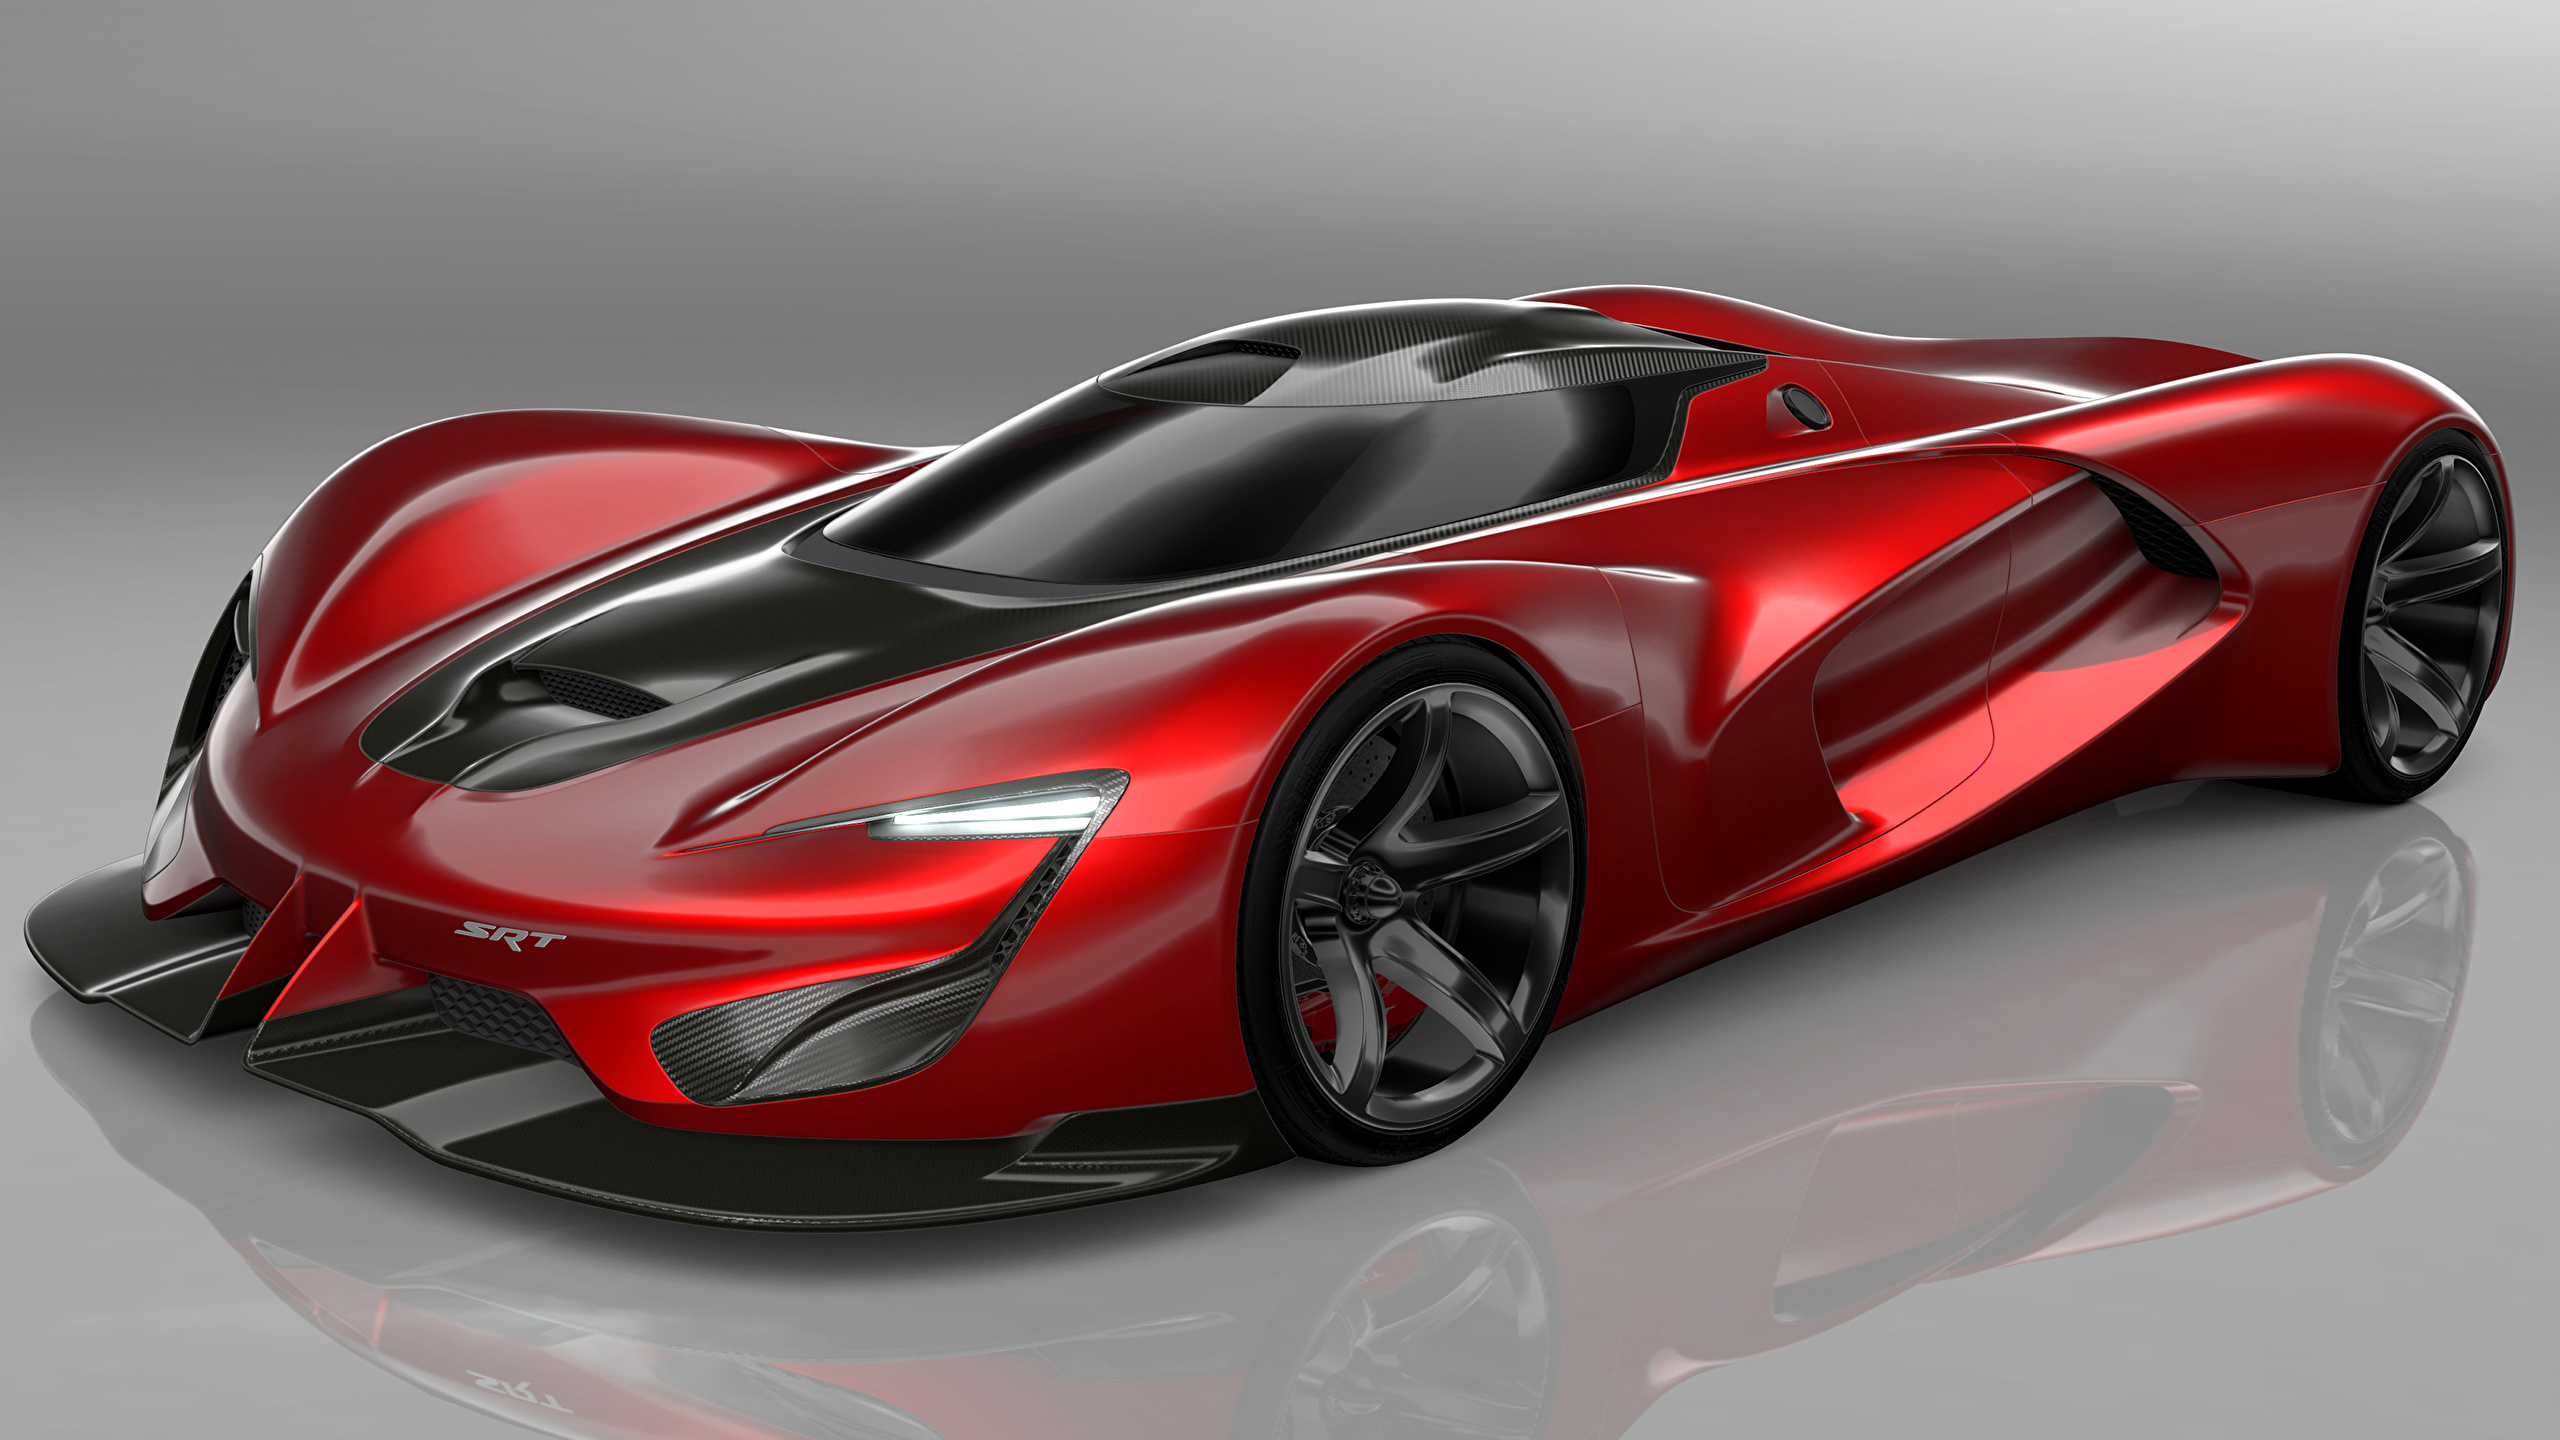 Image 15 Srt Tomahawk Vision Gran Turismo Expensive Red 2560x1440